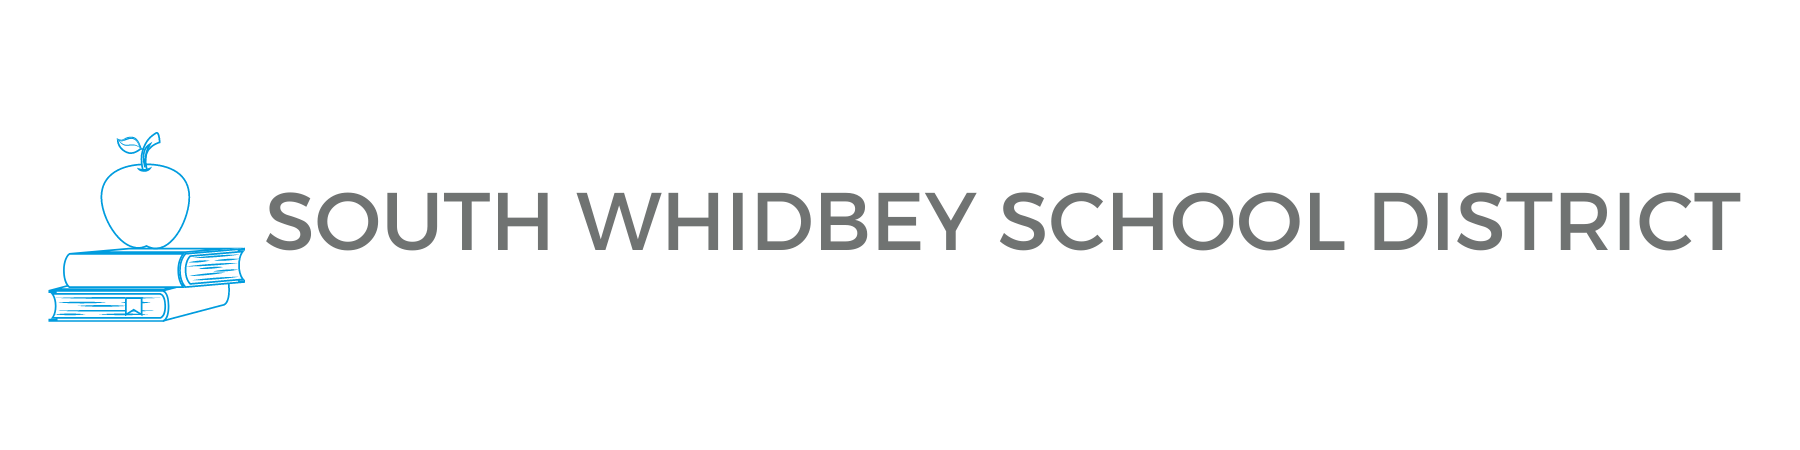 South Whidbey School district, Windermere South Whidbey, South Whidbey, Whidbey island